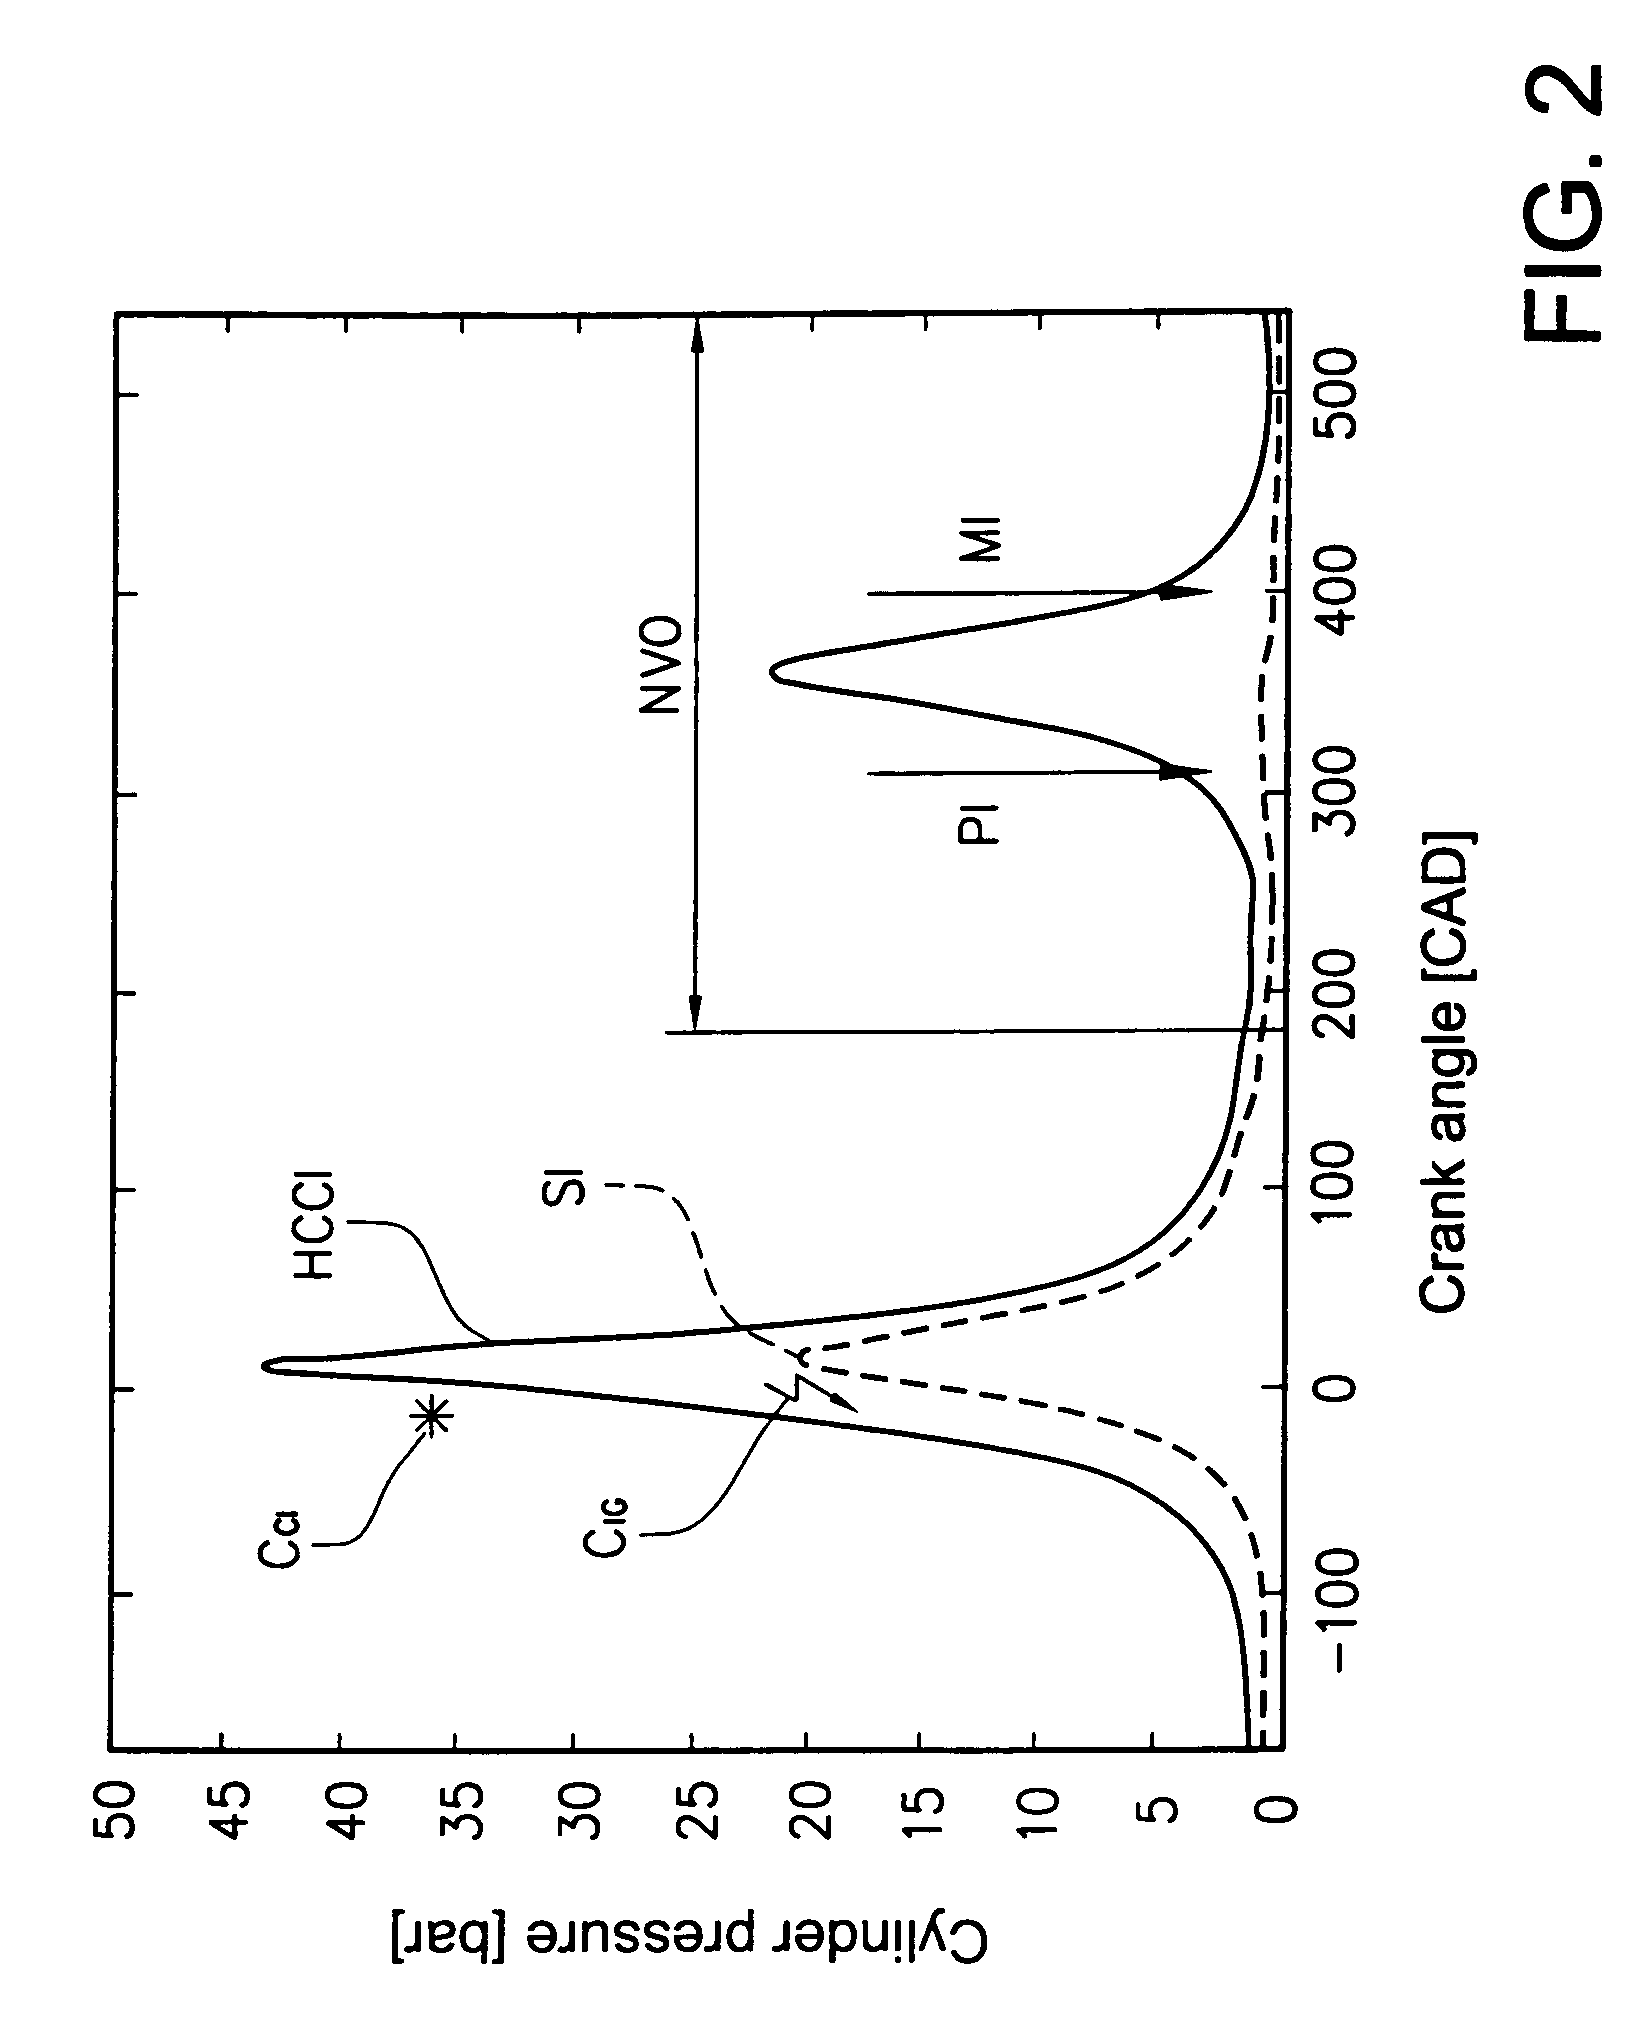 Internal combustion engine and method for auto-ignition operation of said engine